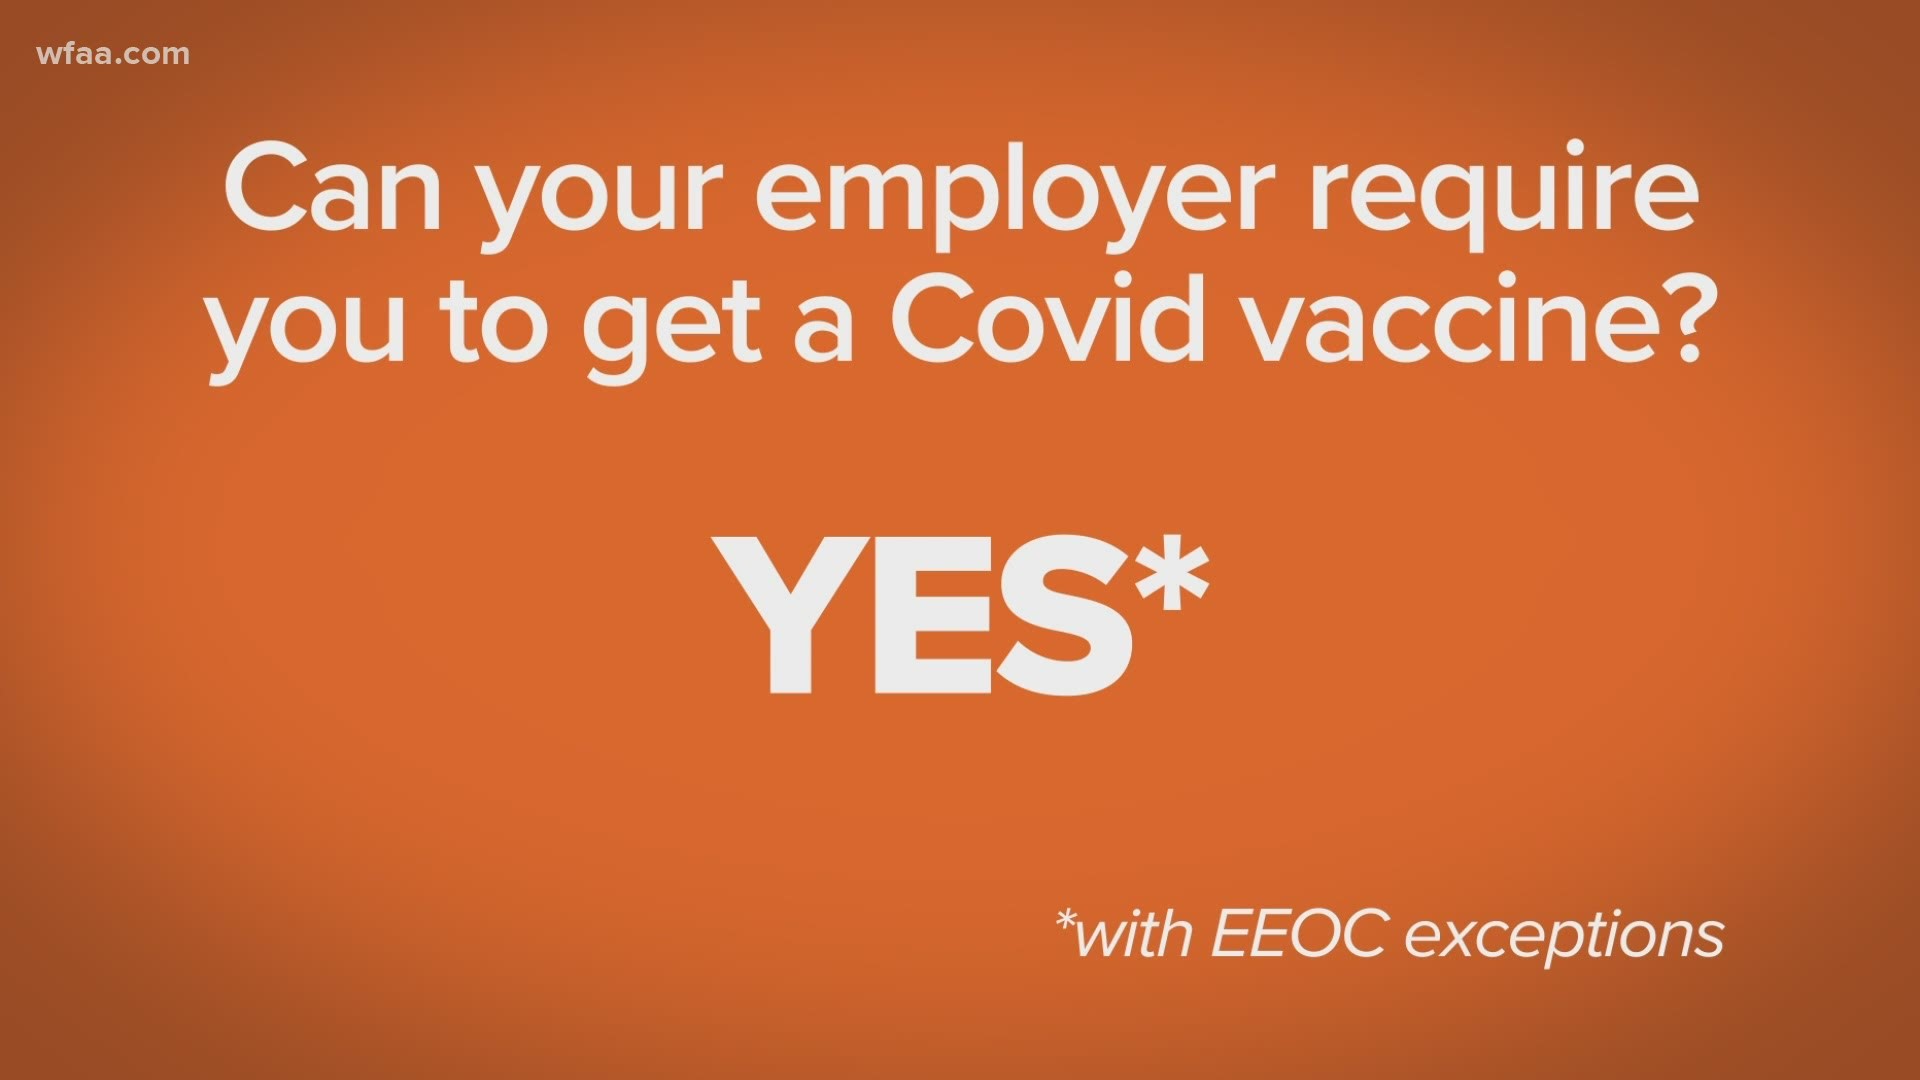 Companies are suing their insurers to pay for COVID-related business costs. Employers also want to know which workers they can require to be vaccinated.